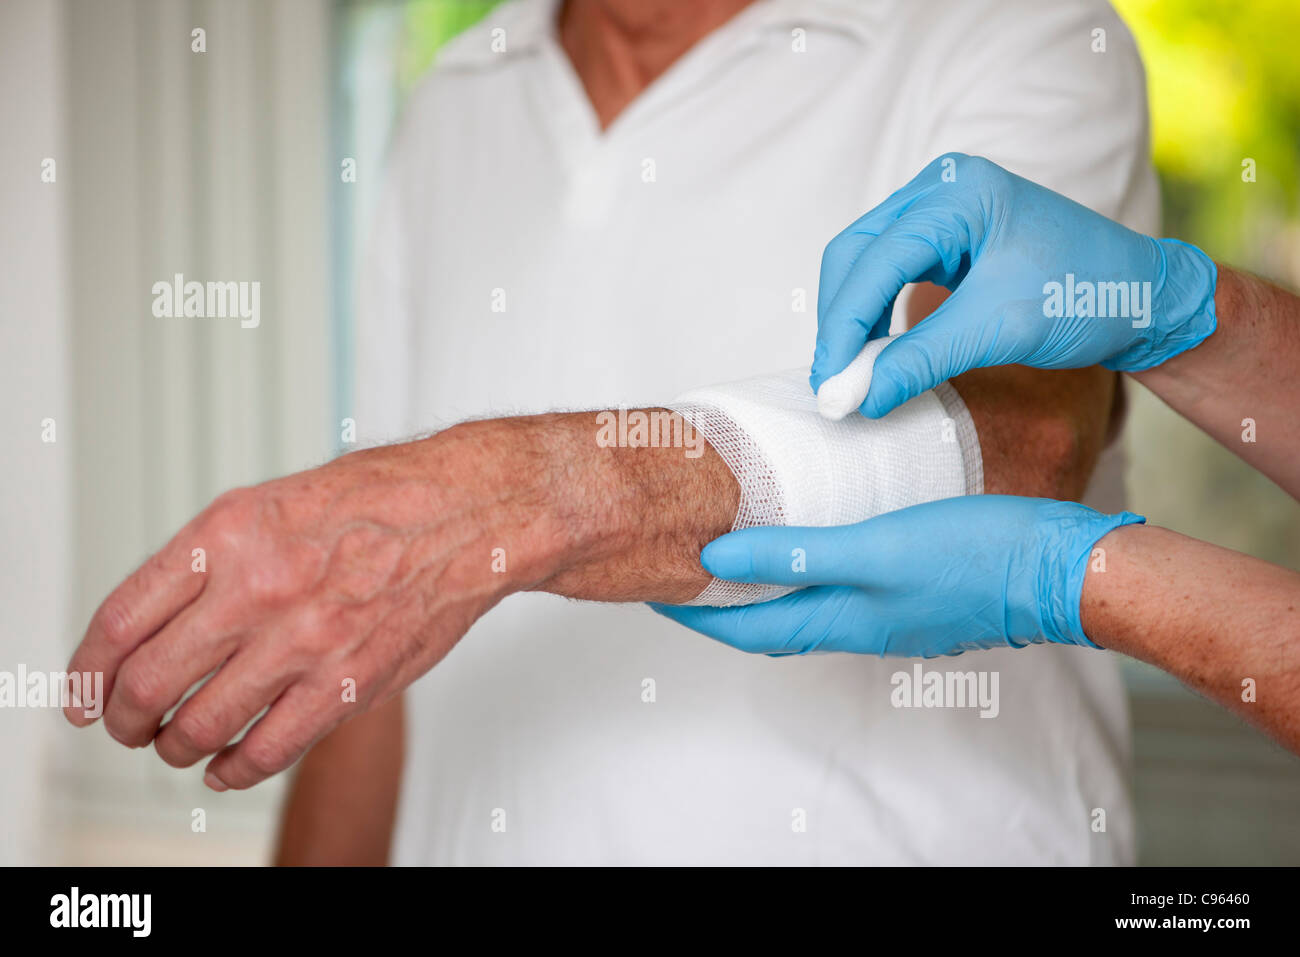 Wound care. Stock Photo